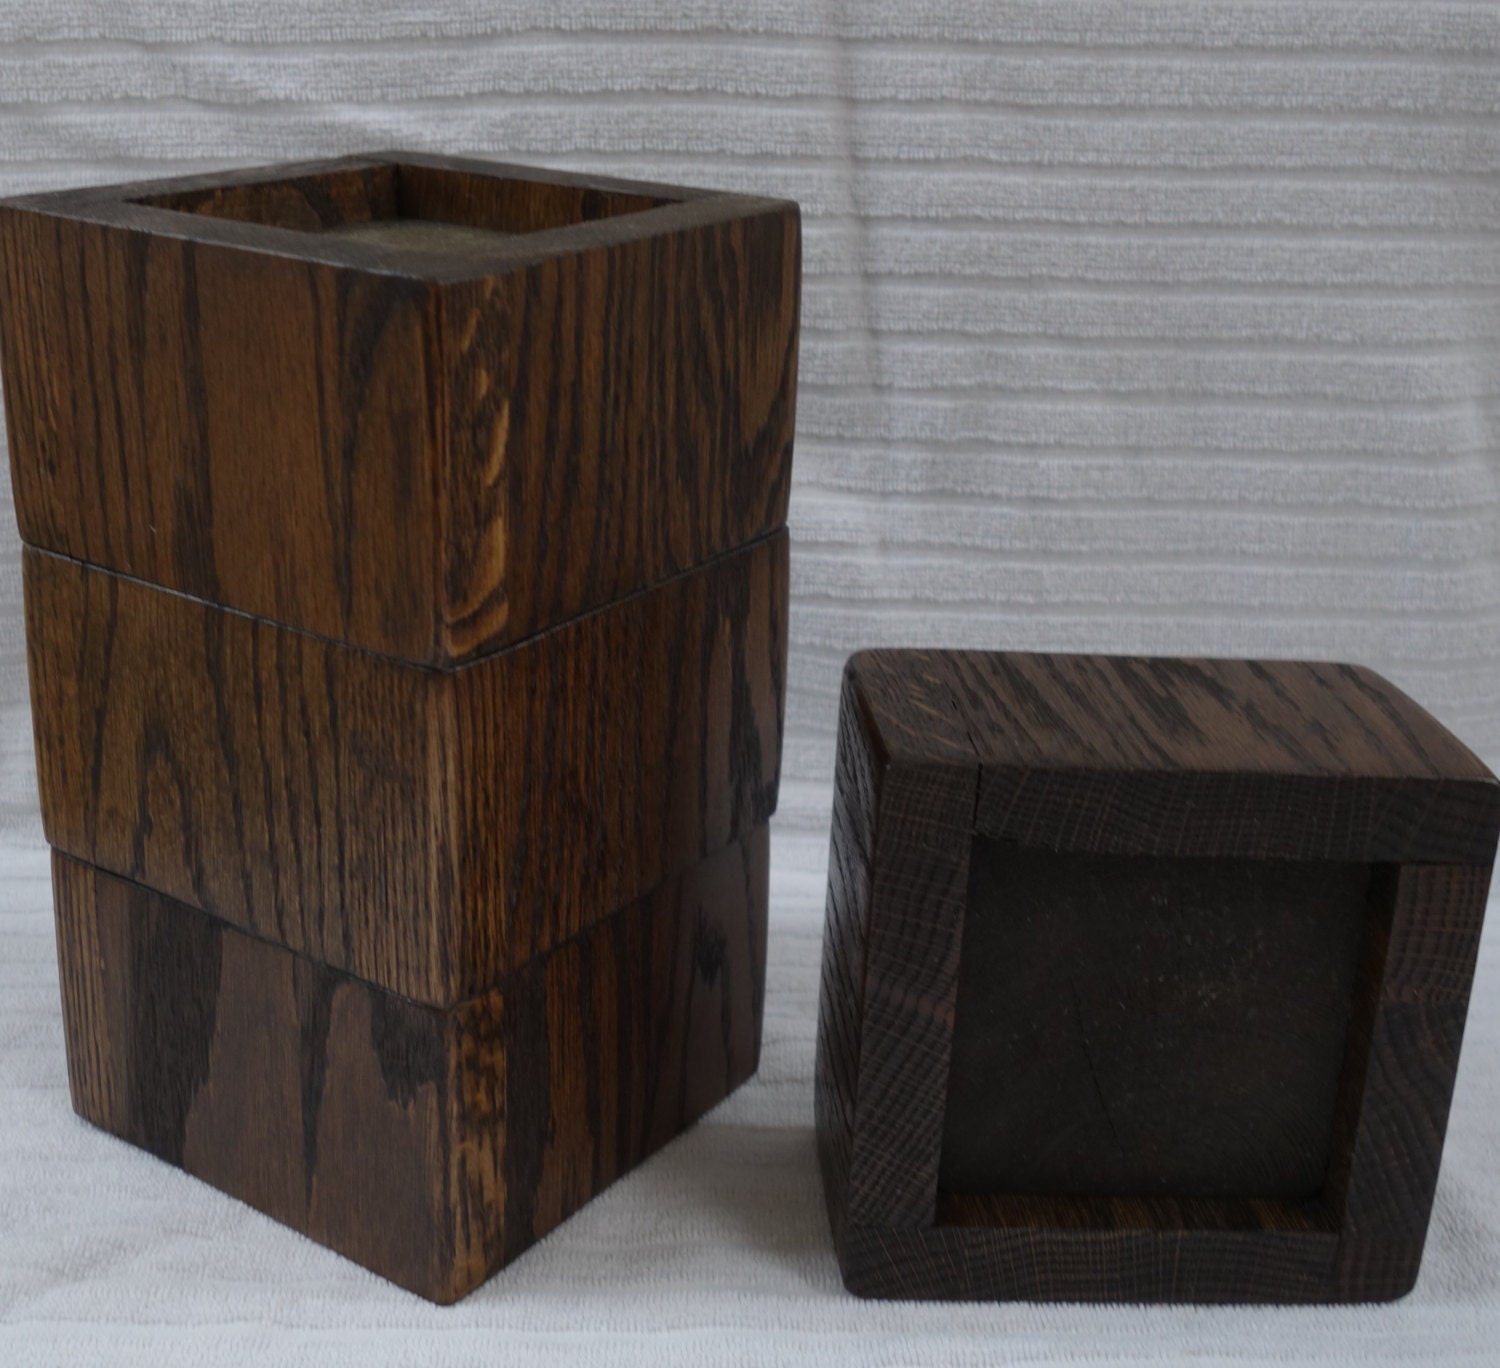 handmade wood 2.5 inch furniture / bed risers solid core set